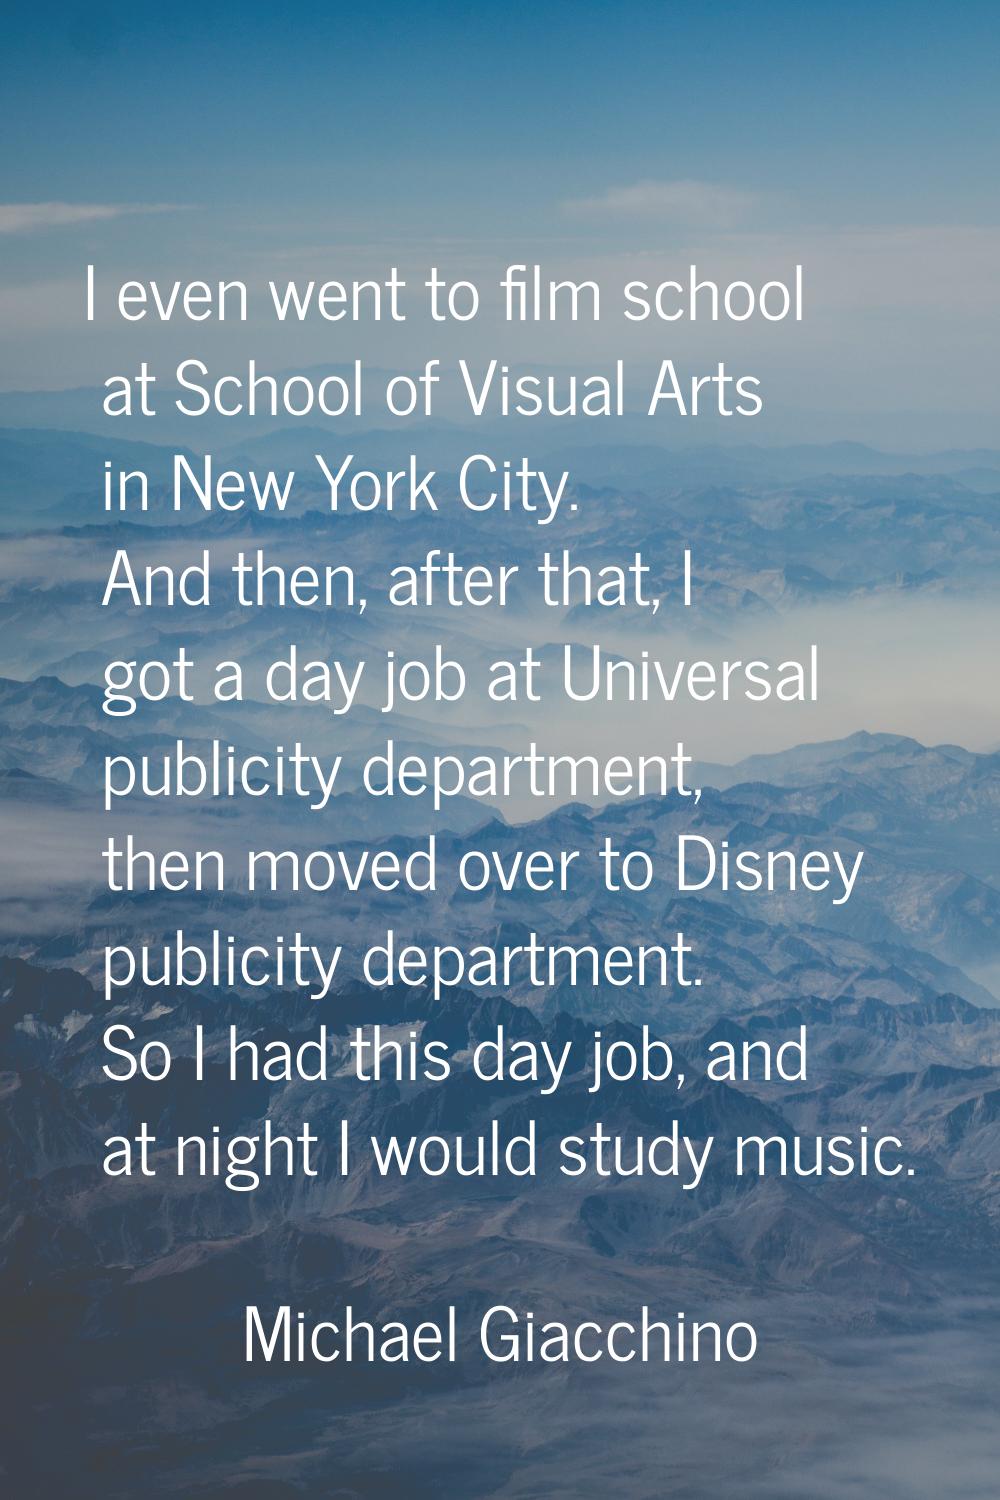 I even went to film school at School of Visual Arts in New York City. And then, after that, I got a